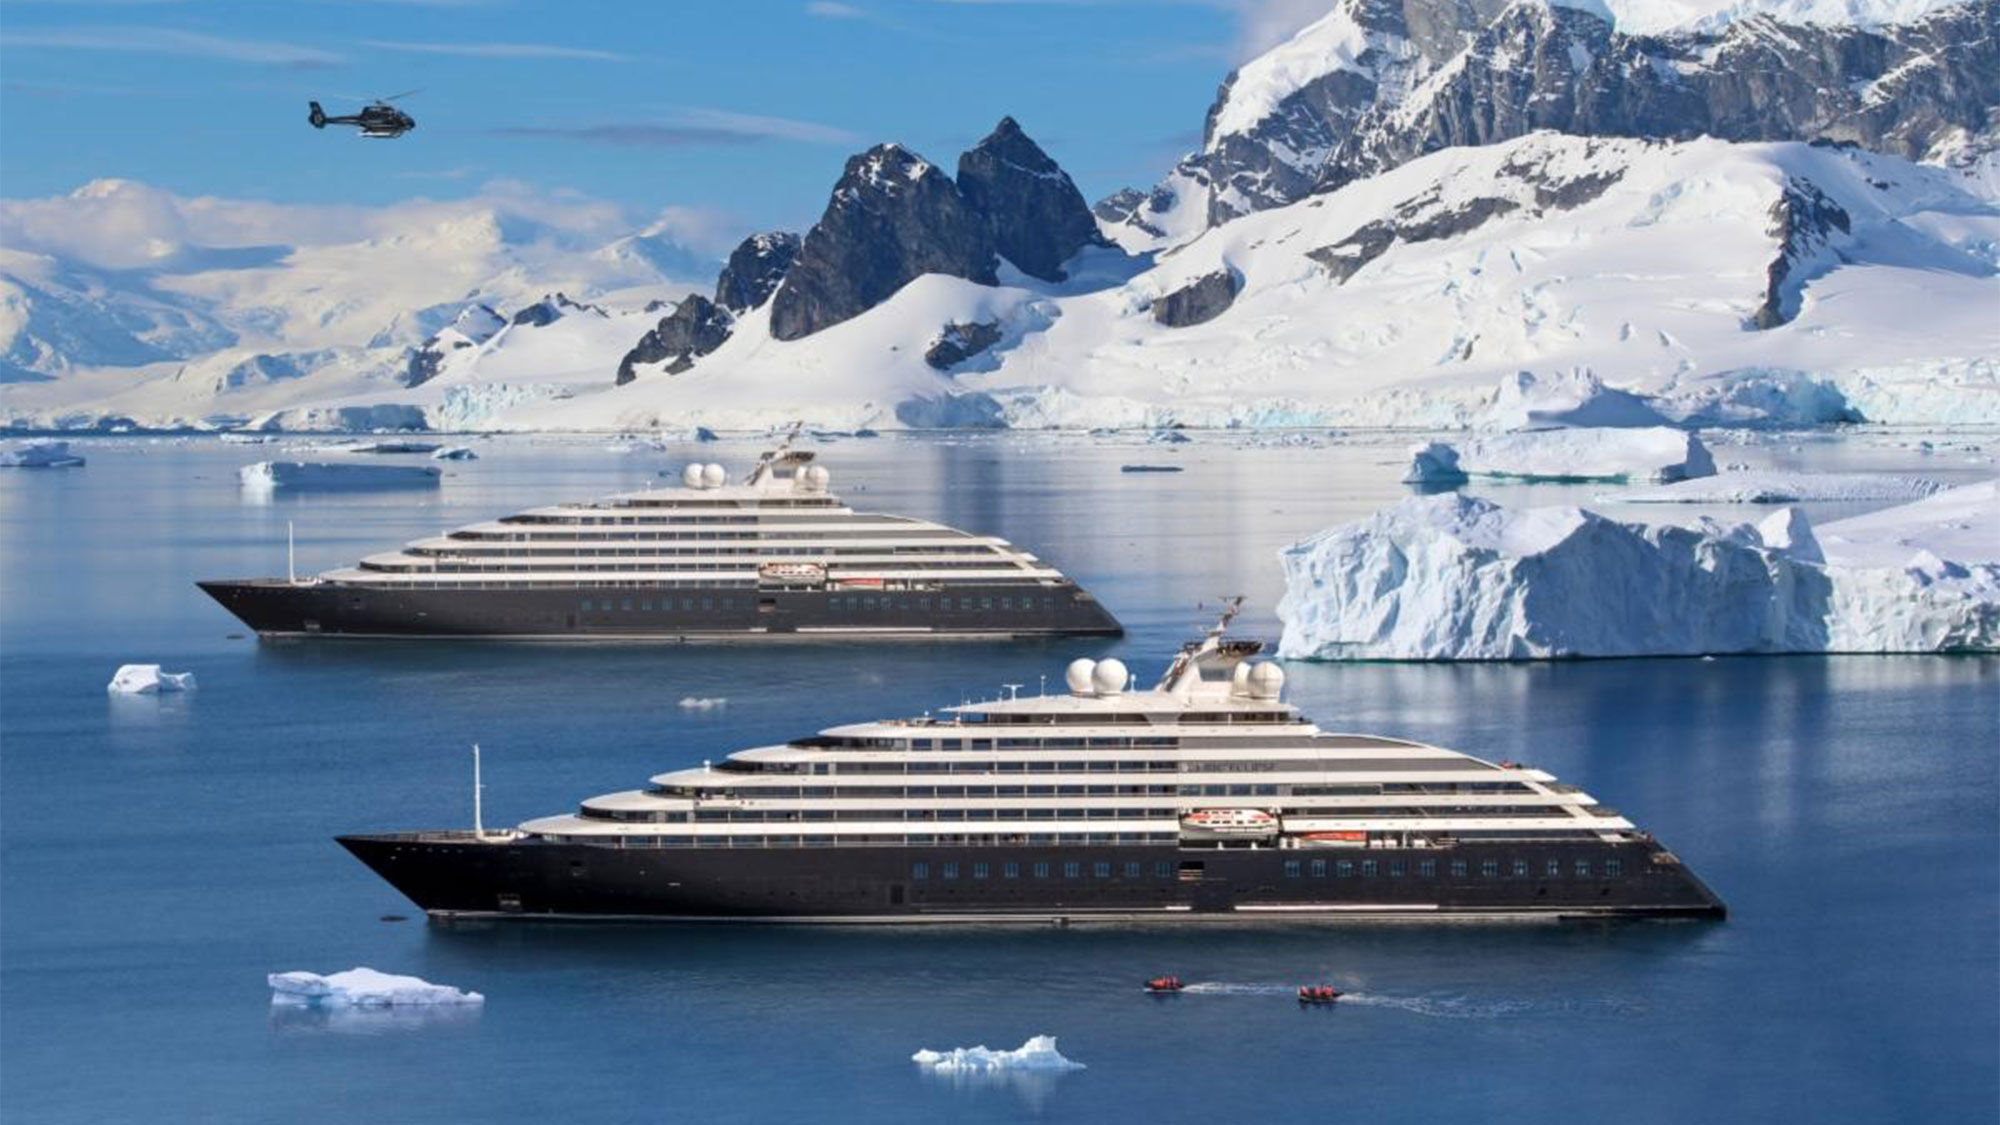 The Scenic Eclipse and Scenic Eclipse II in a rendering. The Eclipse II is scheduled to make its maiden voyage in April.